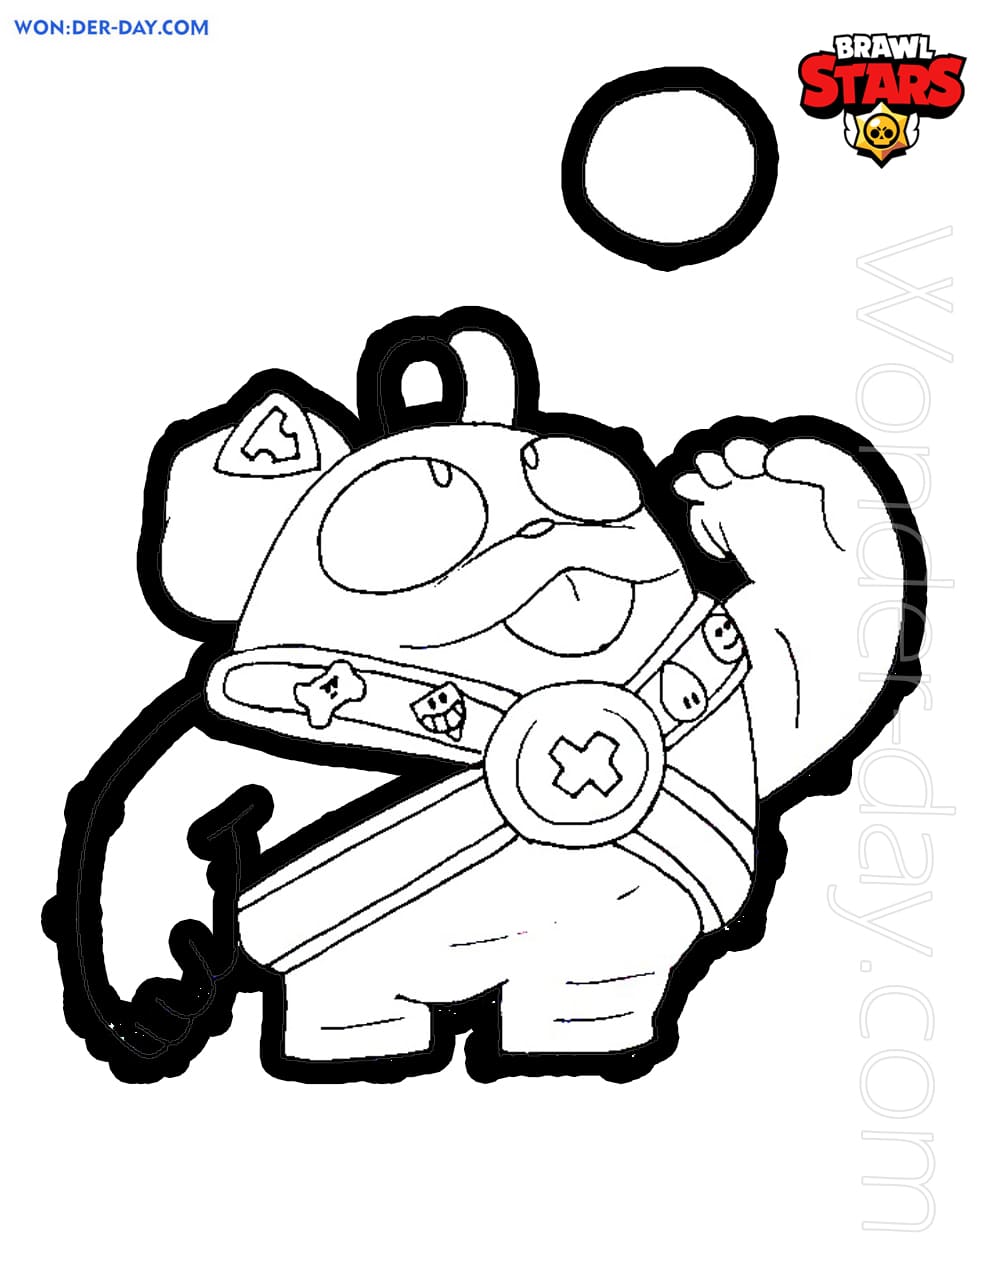 Squeak Brawl Stars Coloring Pages Wonder Day Coloring Pages For Children And Adults - brawl star para colorear squeak